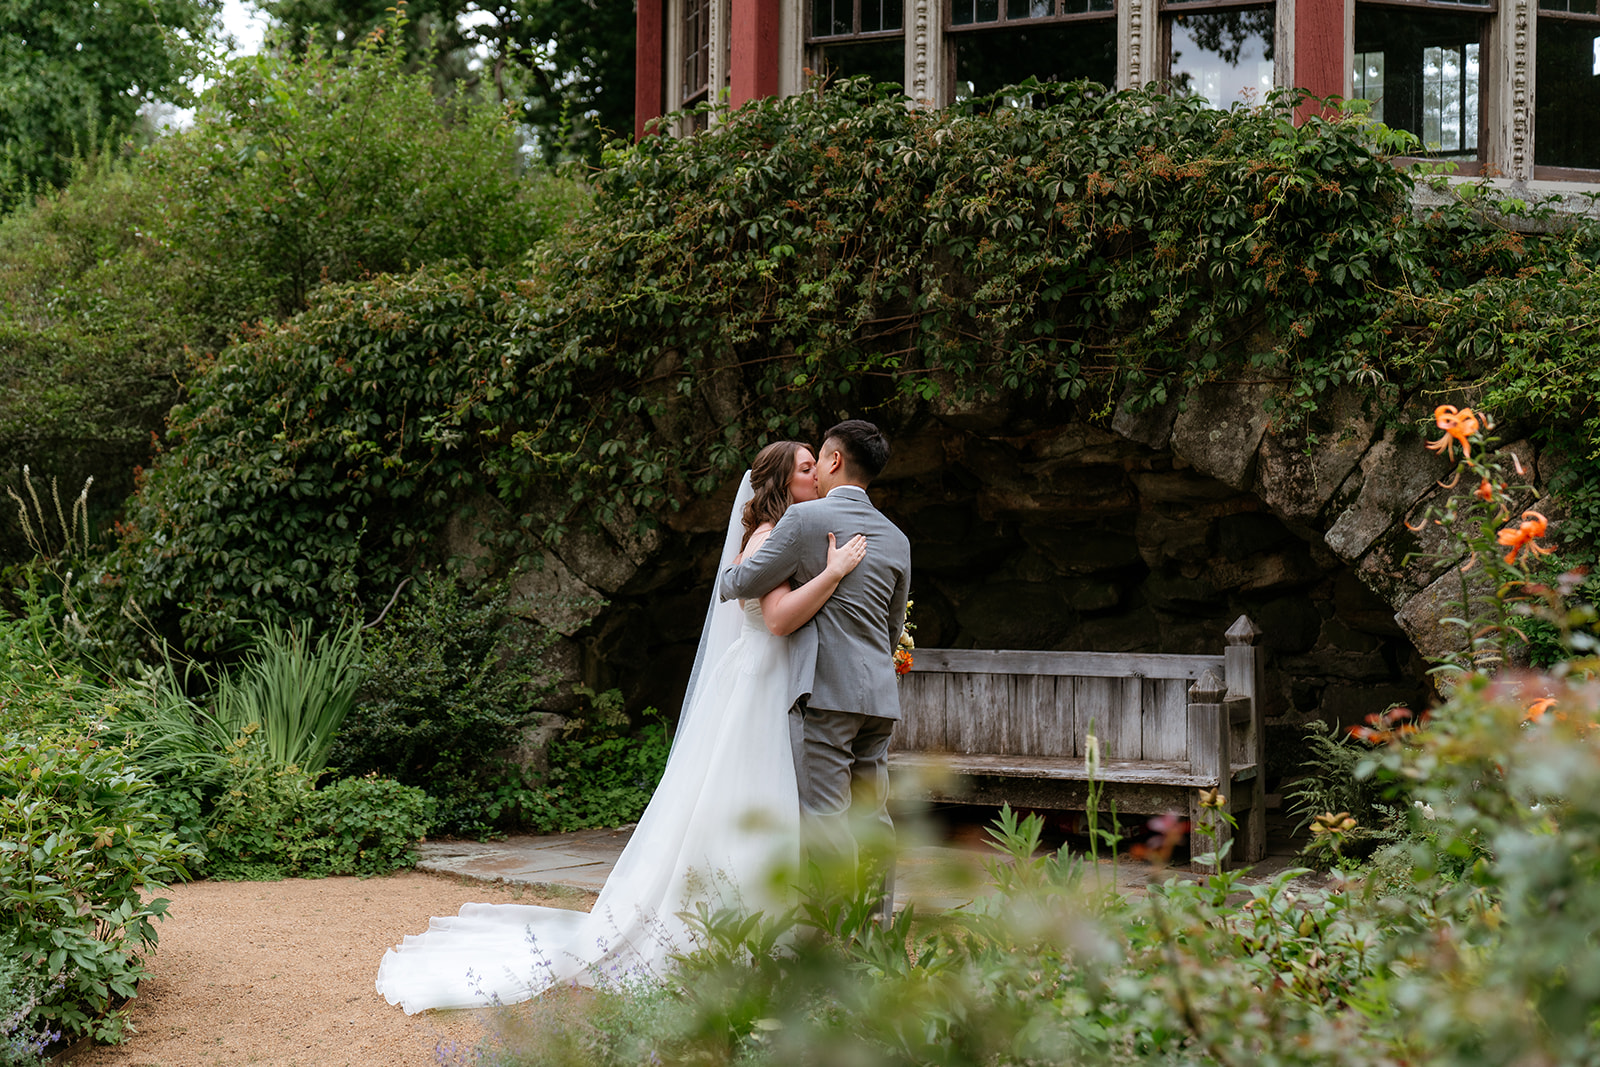 A bride and groom smiling at each other in a garden setting with a stone wall and wooden bench in the background at the estate at moraine farm